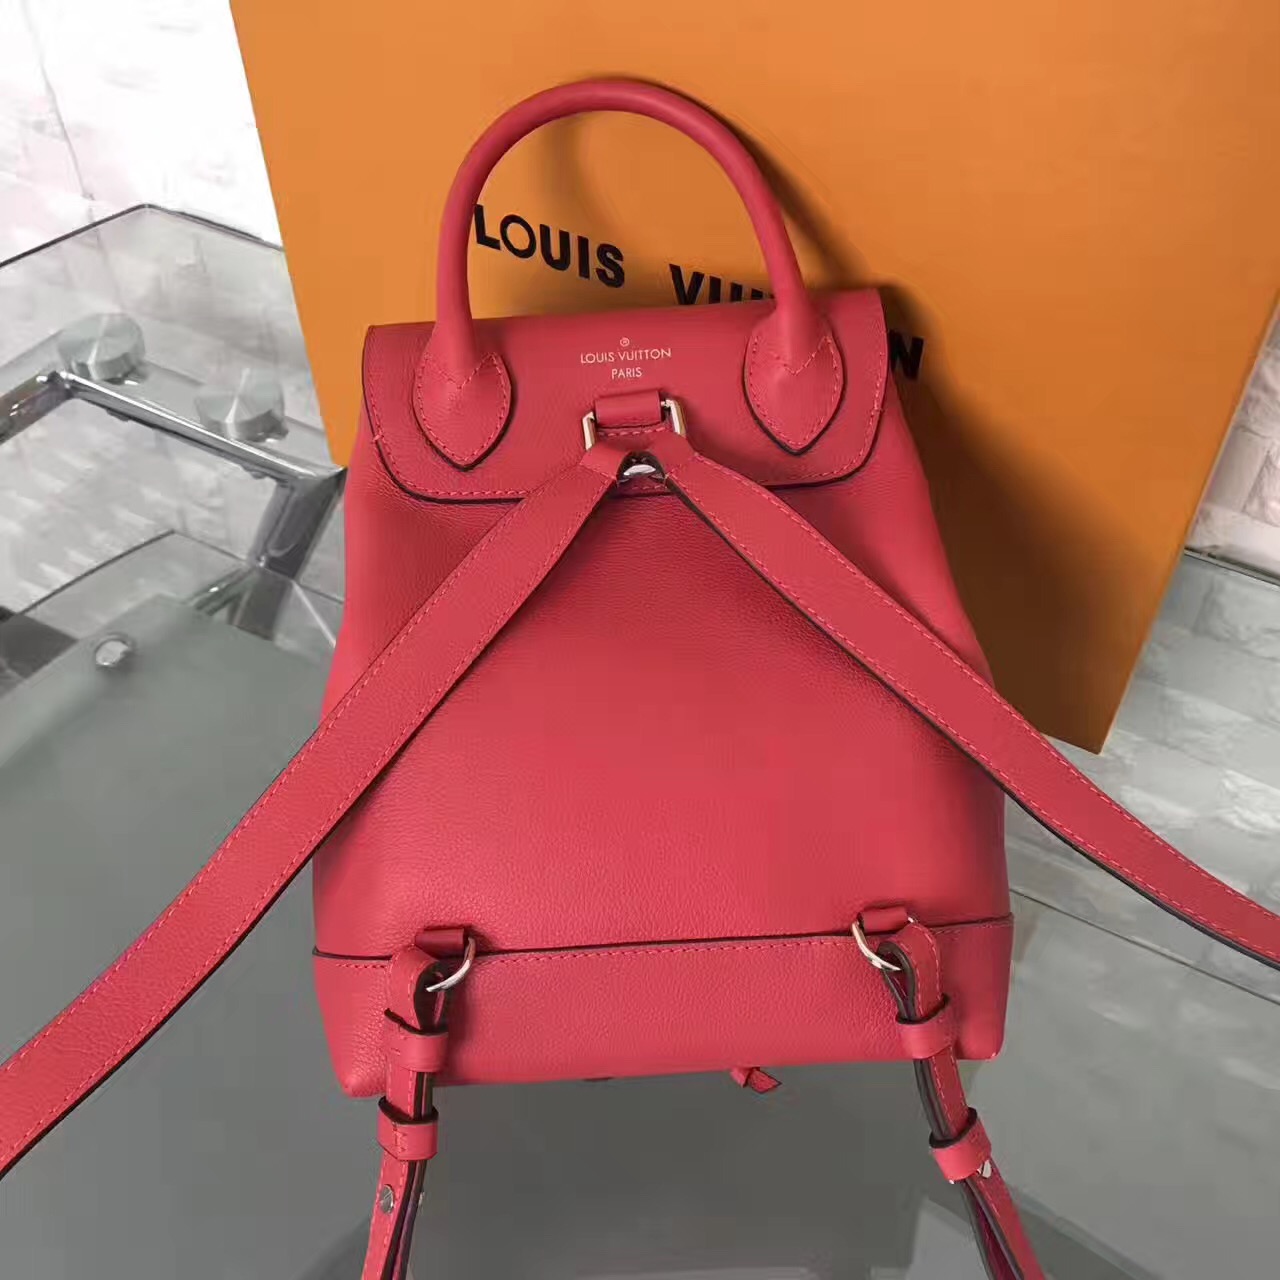 LV Louis Vuitton backpack small leather red handbags [LV349] - $387.00 : Luxury Shop